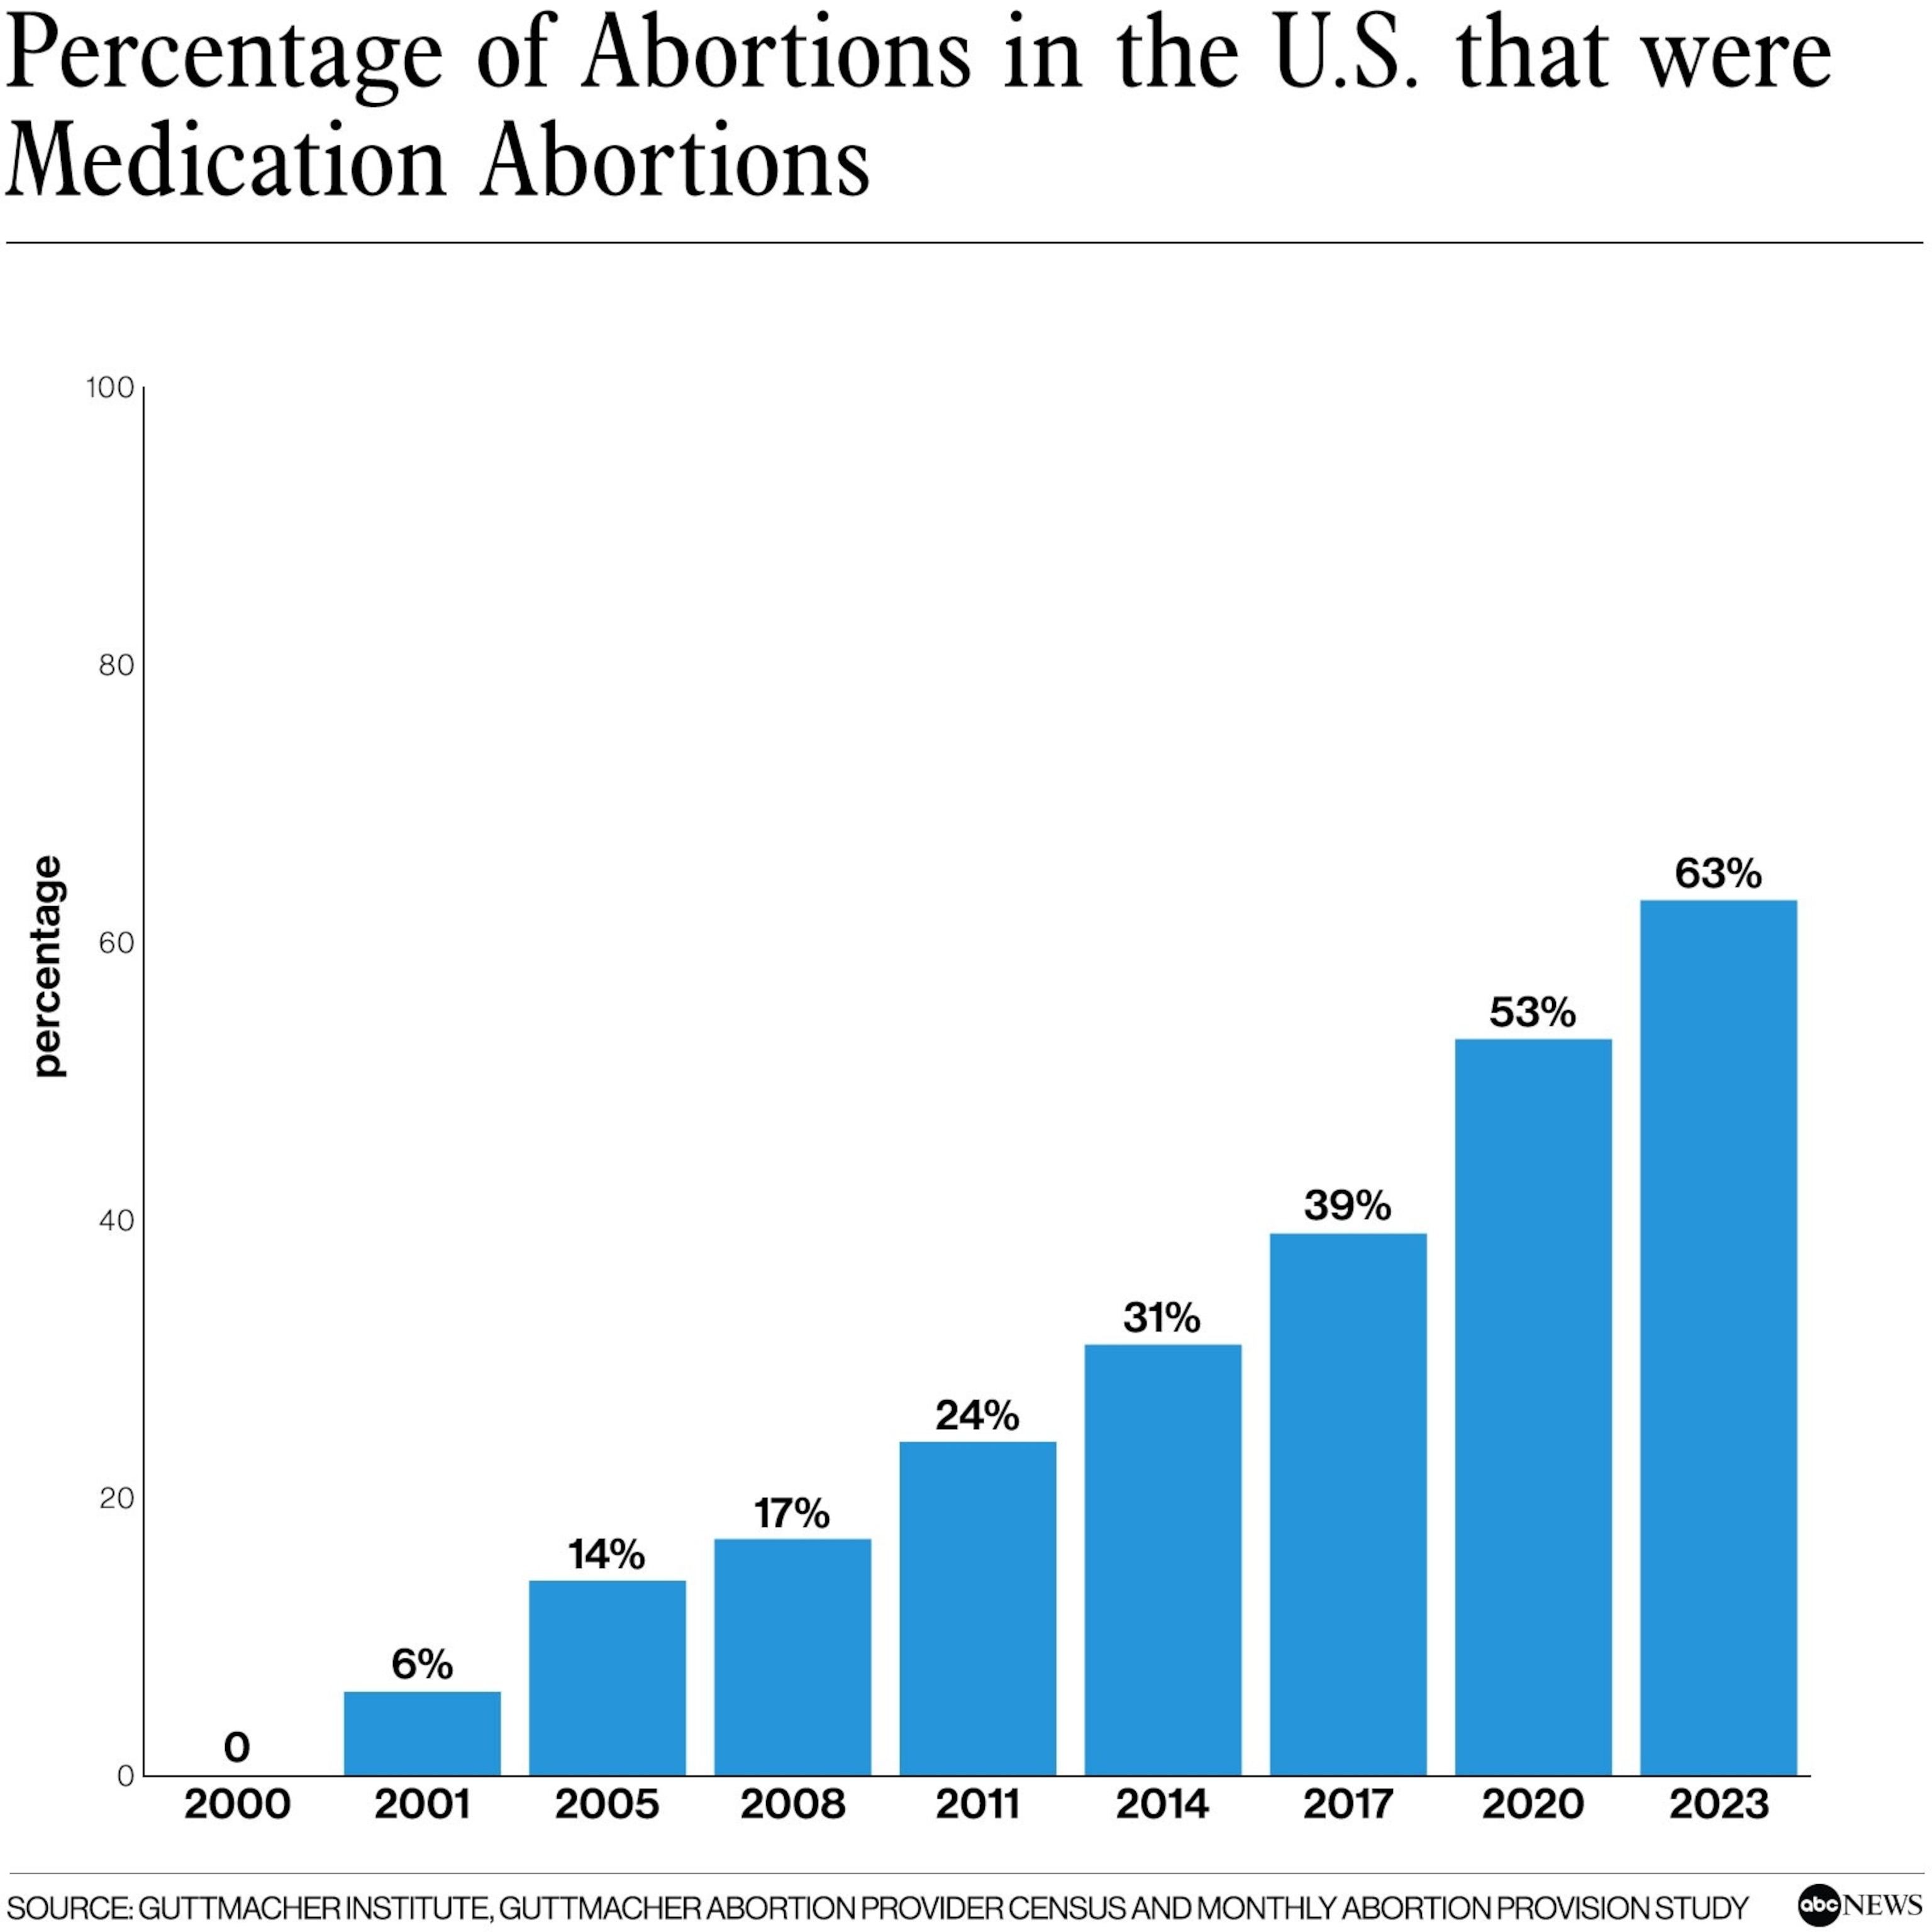 PHOTO: Percentage of abortions in the U.S. that were medication abortions